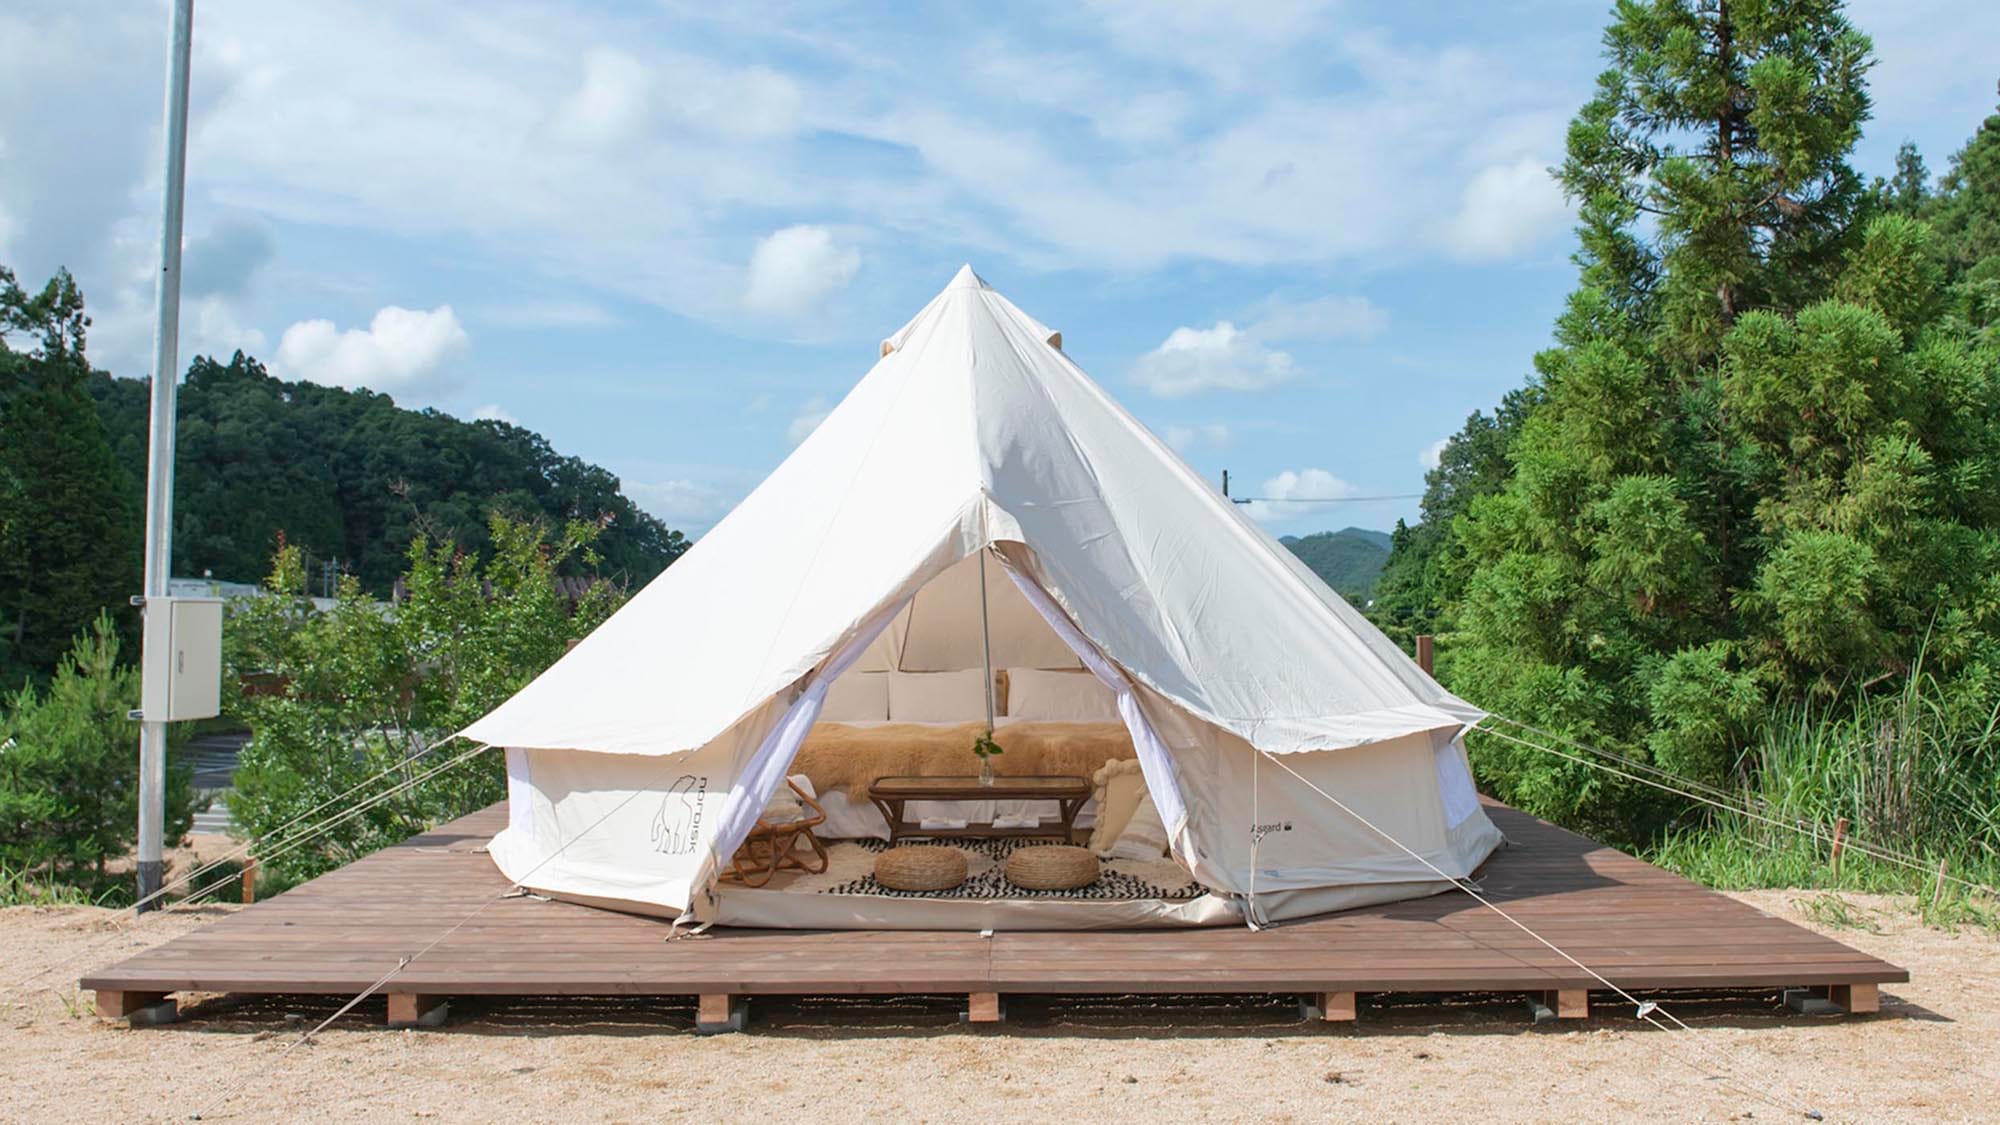 ・ It is a glamping facility where you can easily enjoy the outdoors.